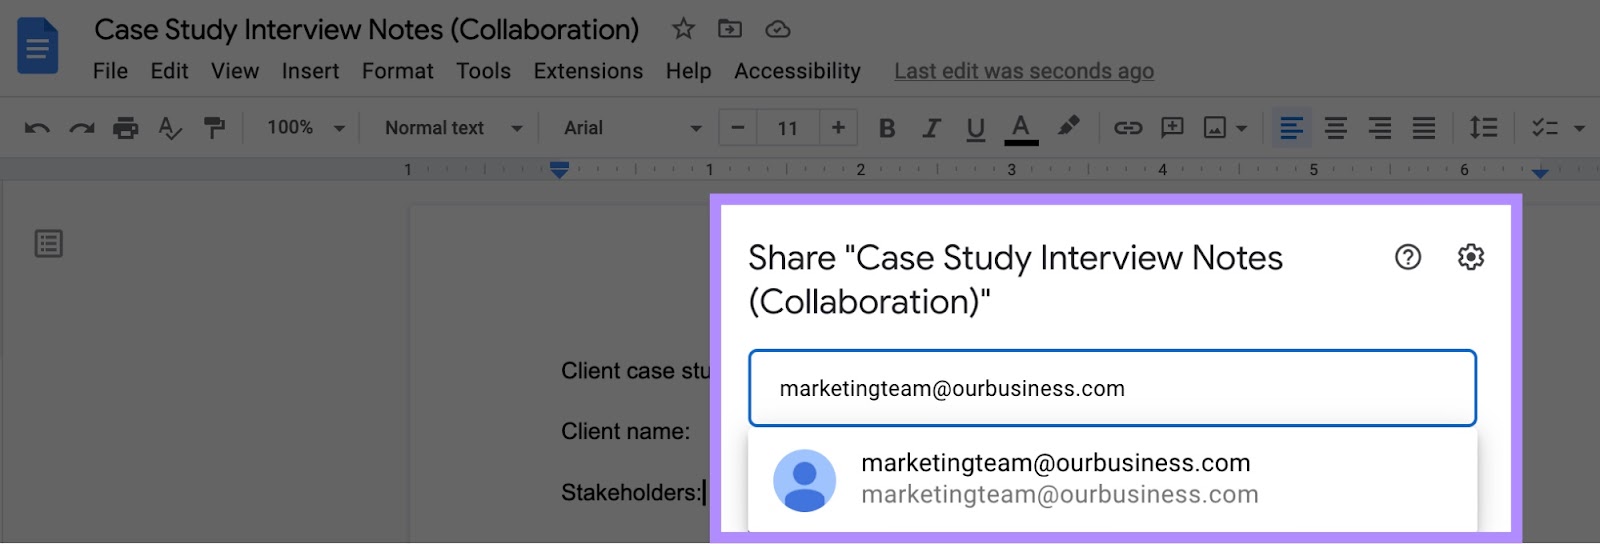 Sharing a Google Doc titled "Case Study Interview Notes"